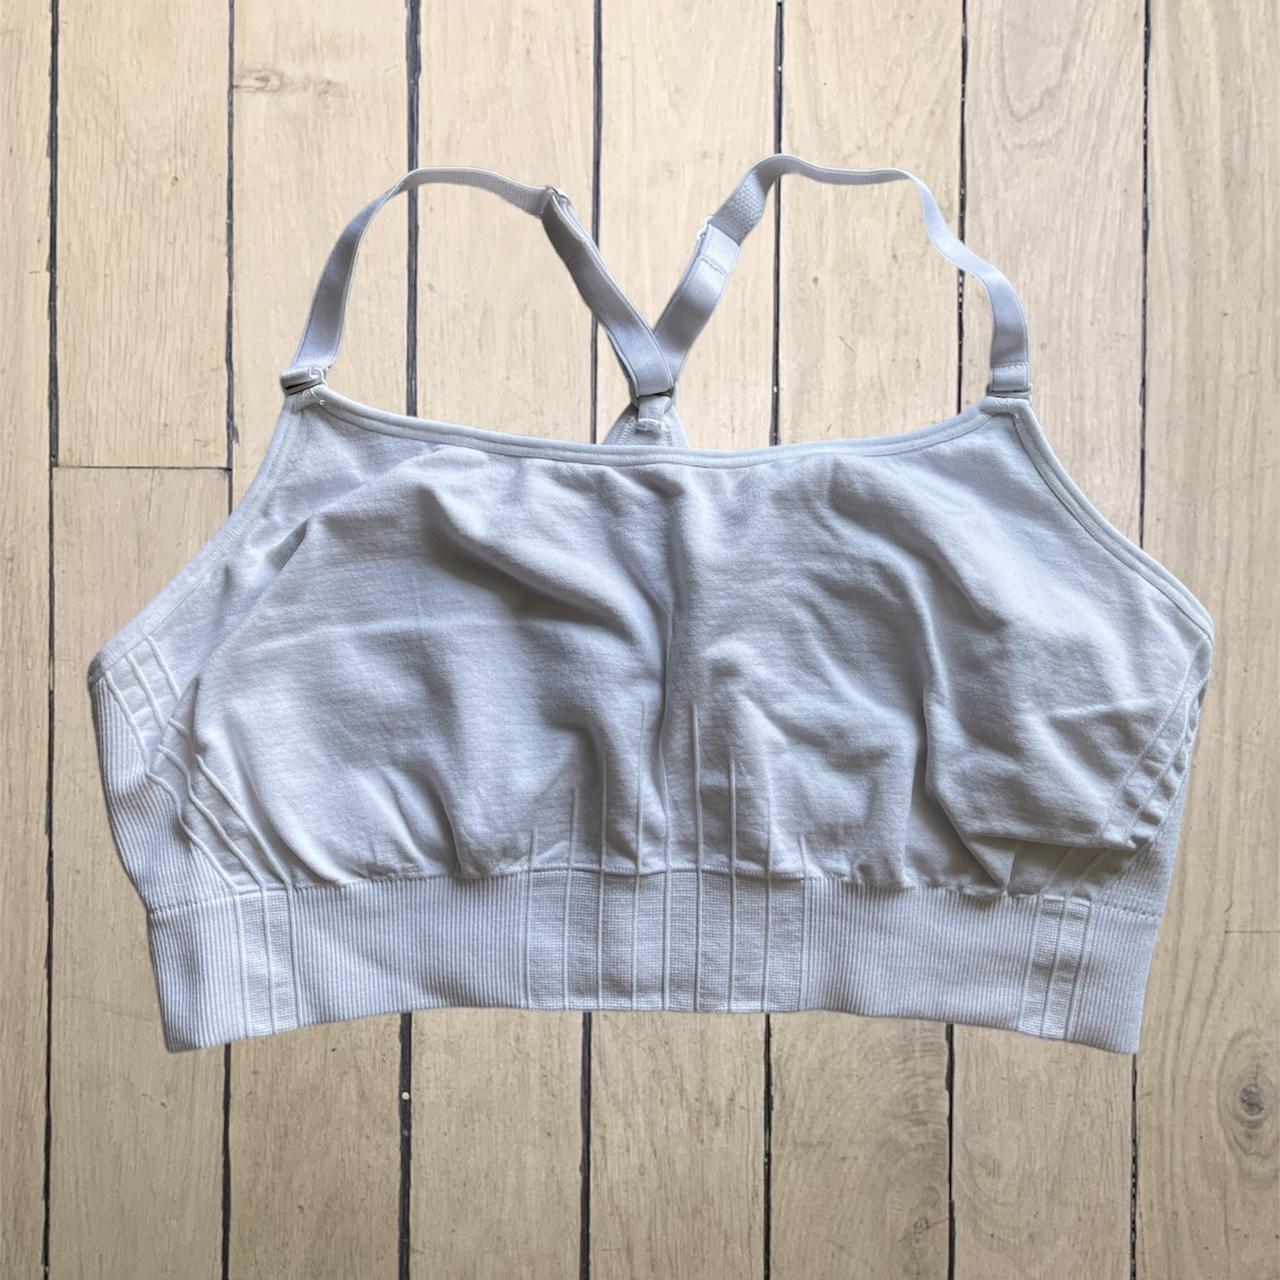 Only worn & washed once! Excellent condition. C9 by - Depop